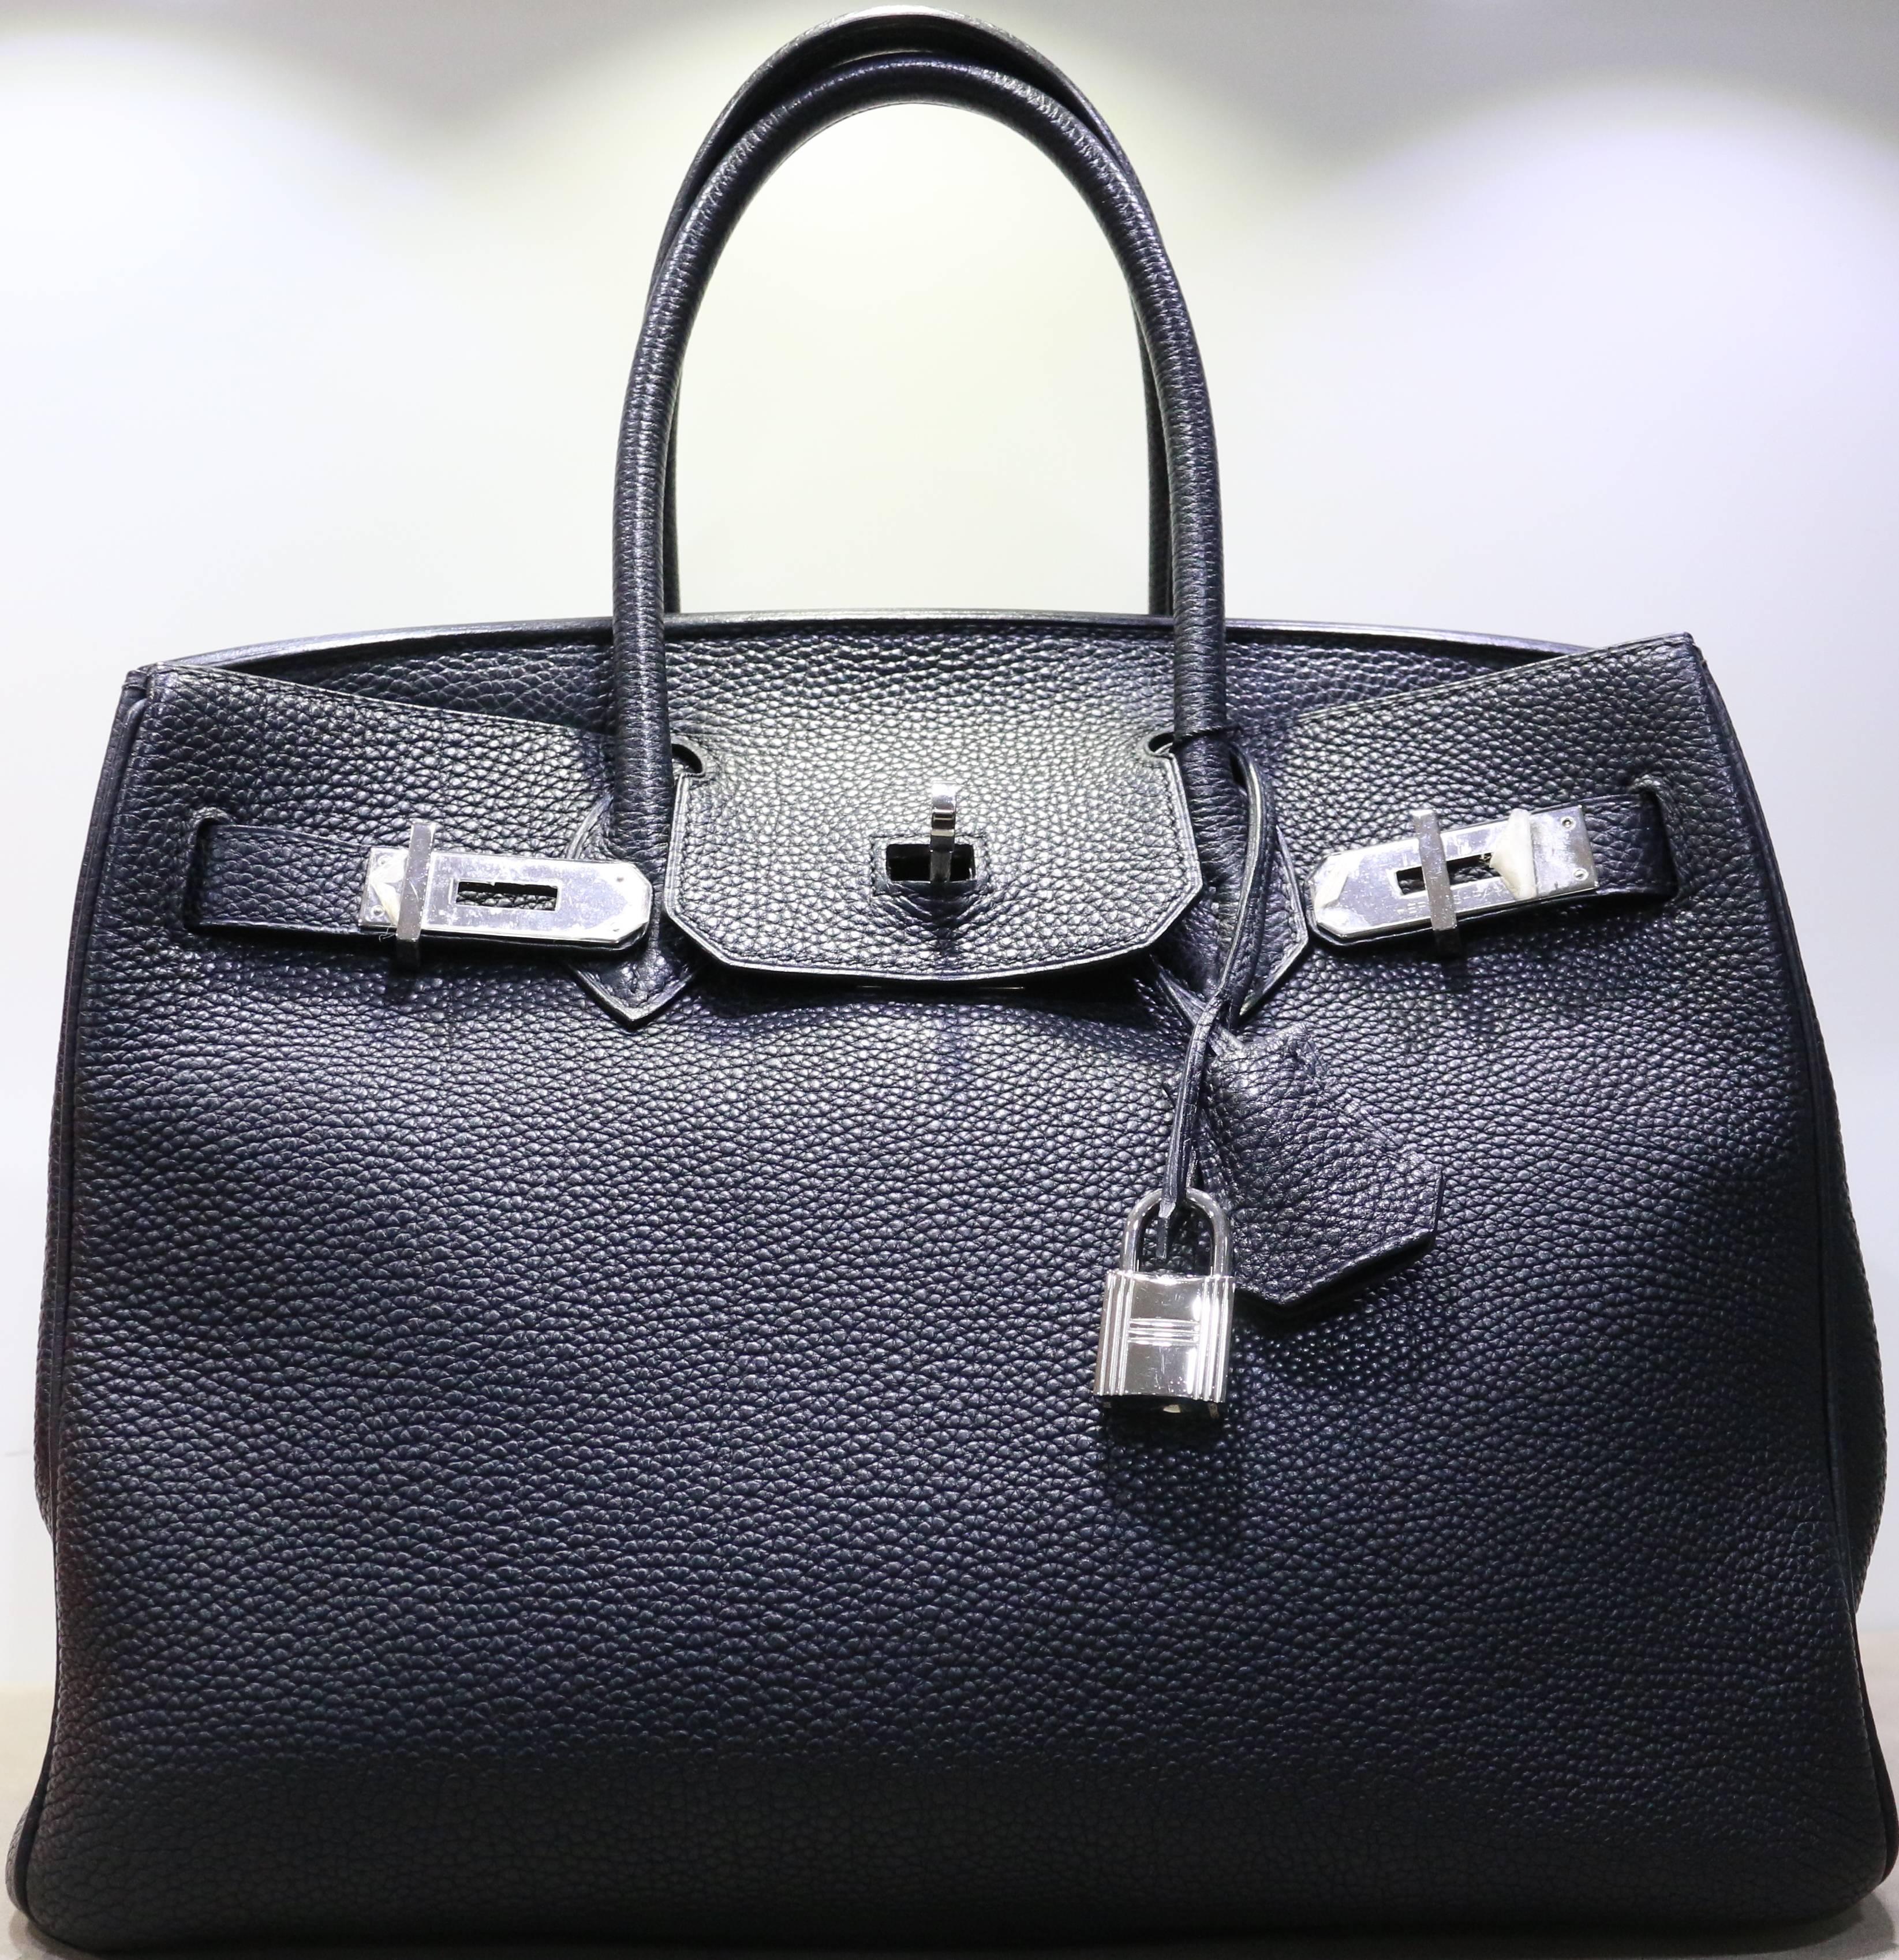 - This Authentic Hermes black Birkin 30cm in togo leather with silver hardware is chic, elegant and classic and timeless. The bag is in excellent preowned condition. 

- Interior pockets: 1 open, 1 zippered. 

- Made in France. 
 
- Measurements: